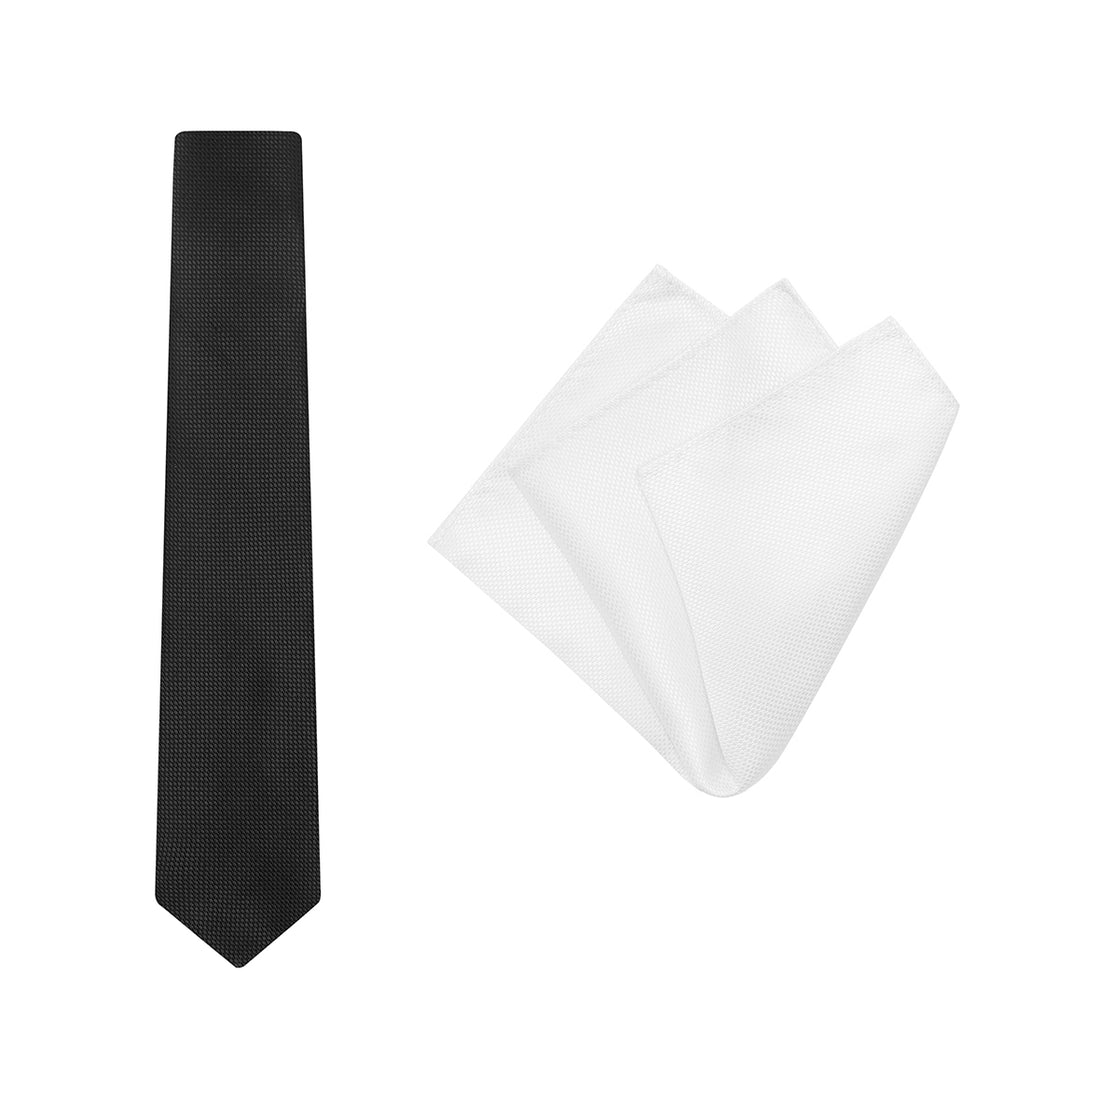 TIE + POCKET SQUARE SET. Wedding. Black/White. Supplied with a white pocket square.-Ties-PEROZ Accessories